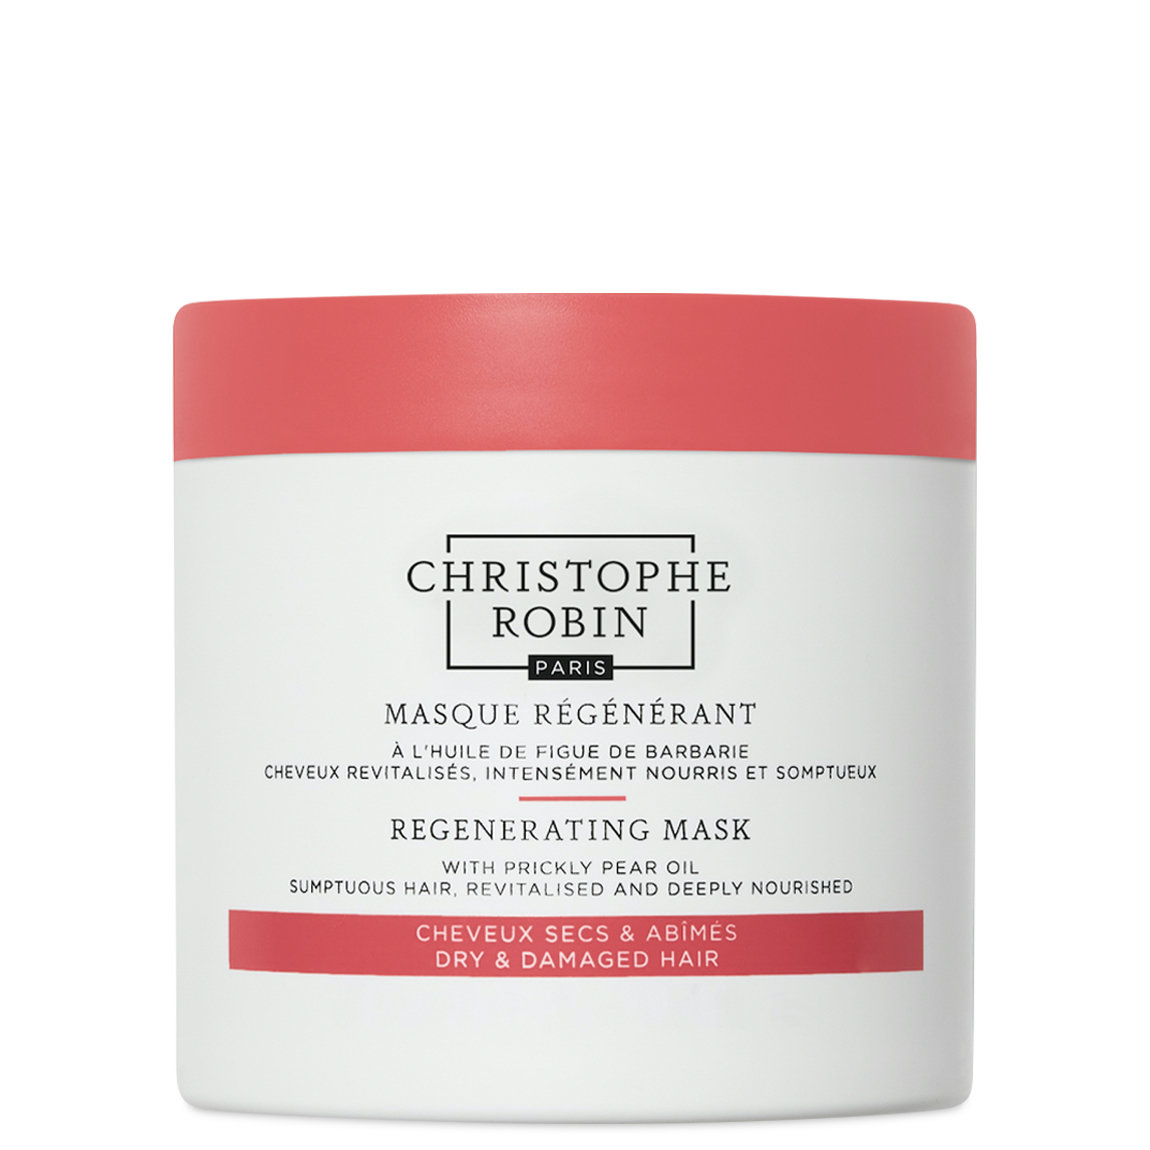 https://www.beautylish.com/s/christophe-robin-regenerating-mask-with-rare-prickly-pear-oil?utm_source=beautylish_article%20&utm_campaign=vzsia